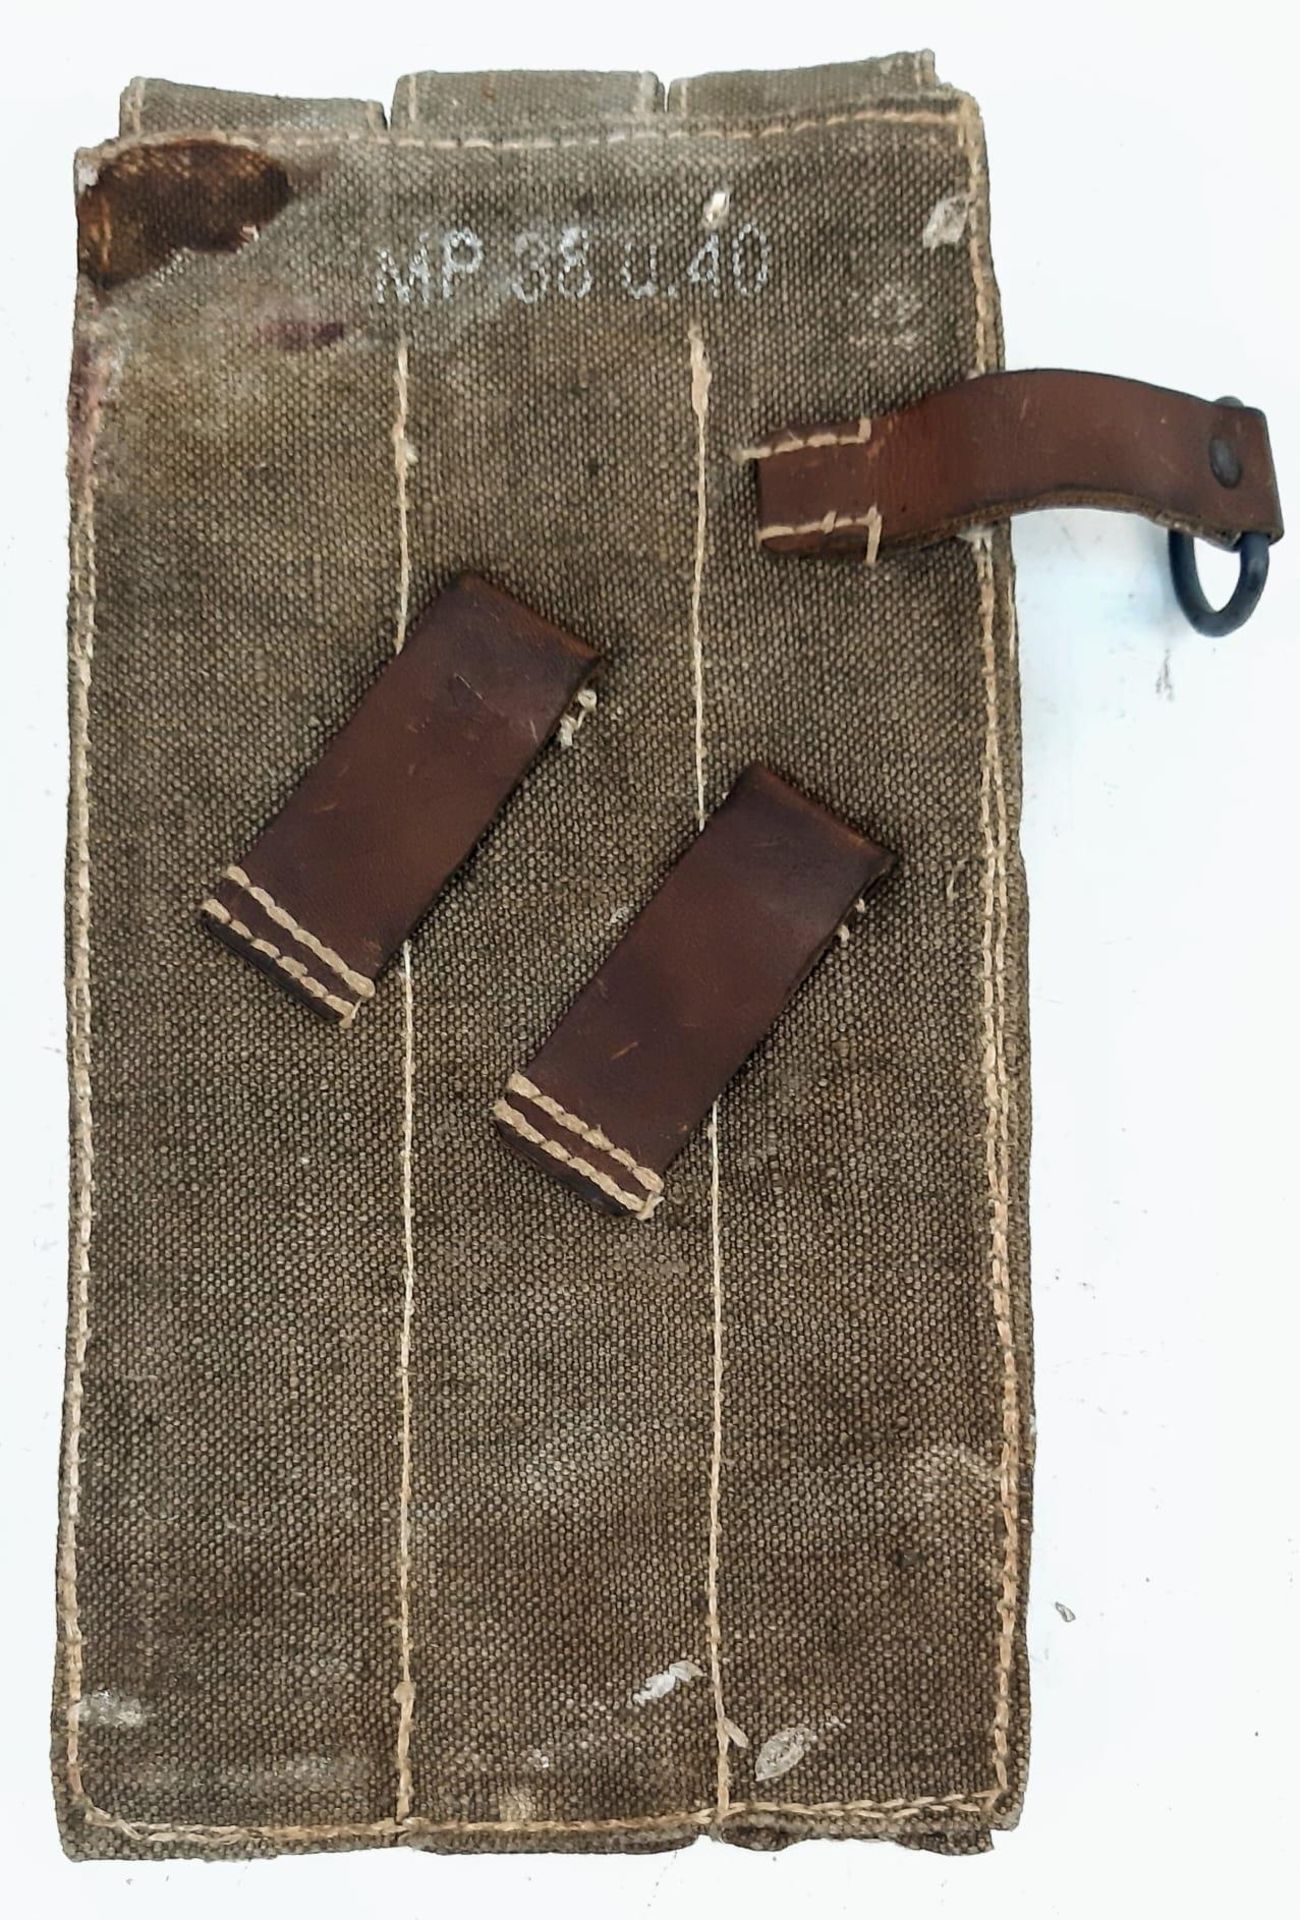 WW2 German MP38 – MP40 Ammo Pouch with 3 MP40 Magazines Dated 1941. Nice Markings. 100% Original. - Image 4 of 4